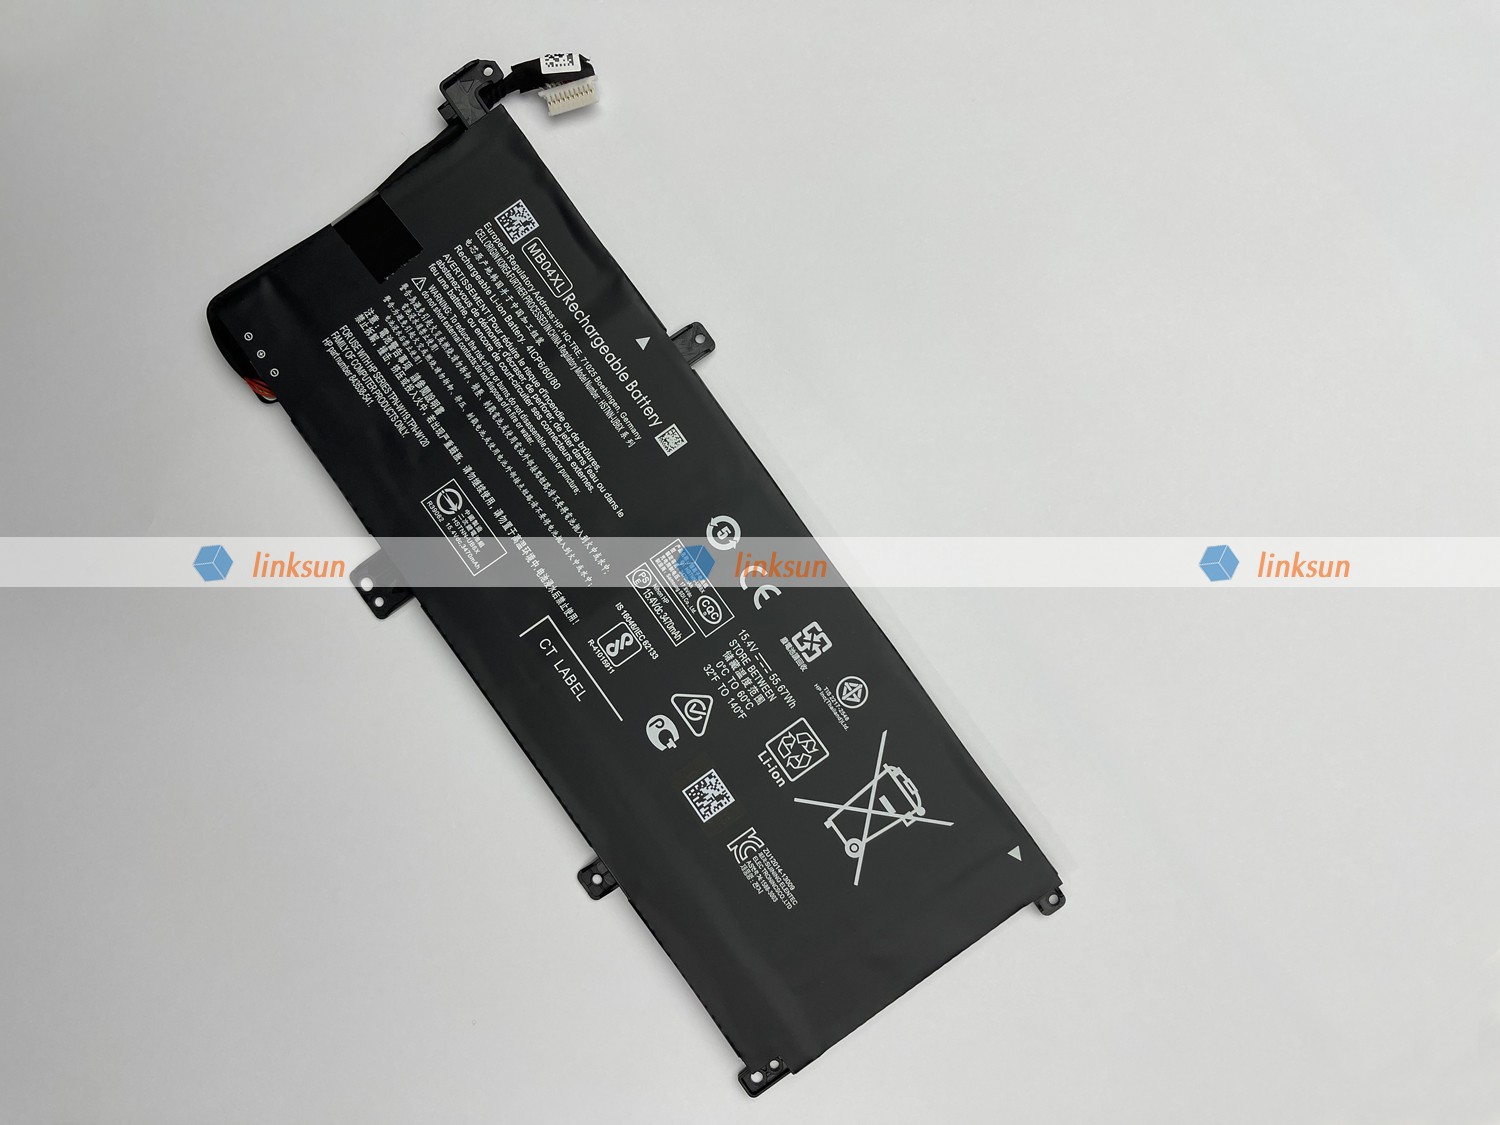 MB04XL battery inclined